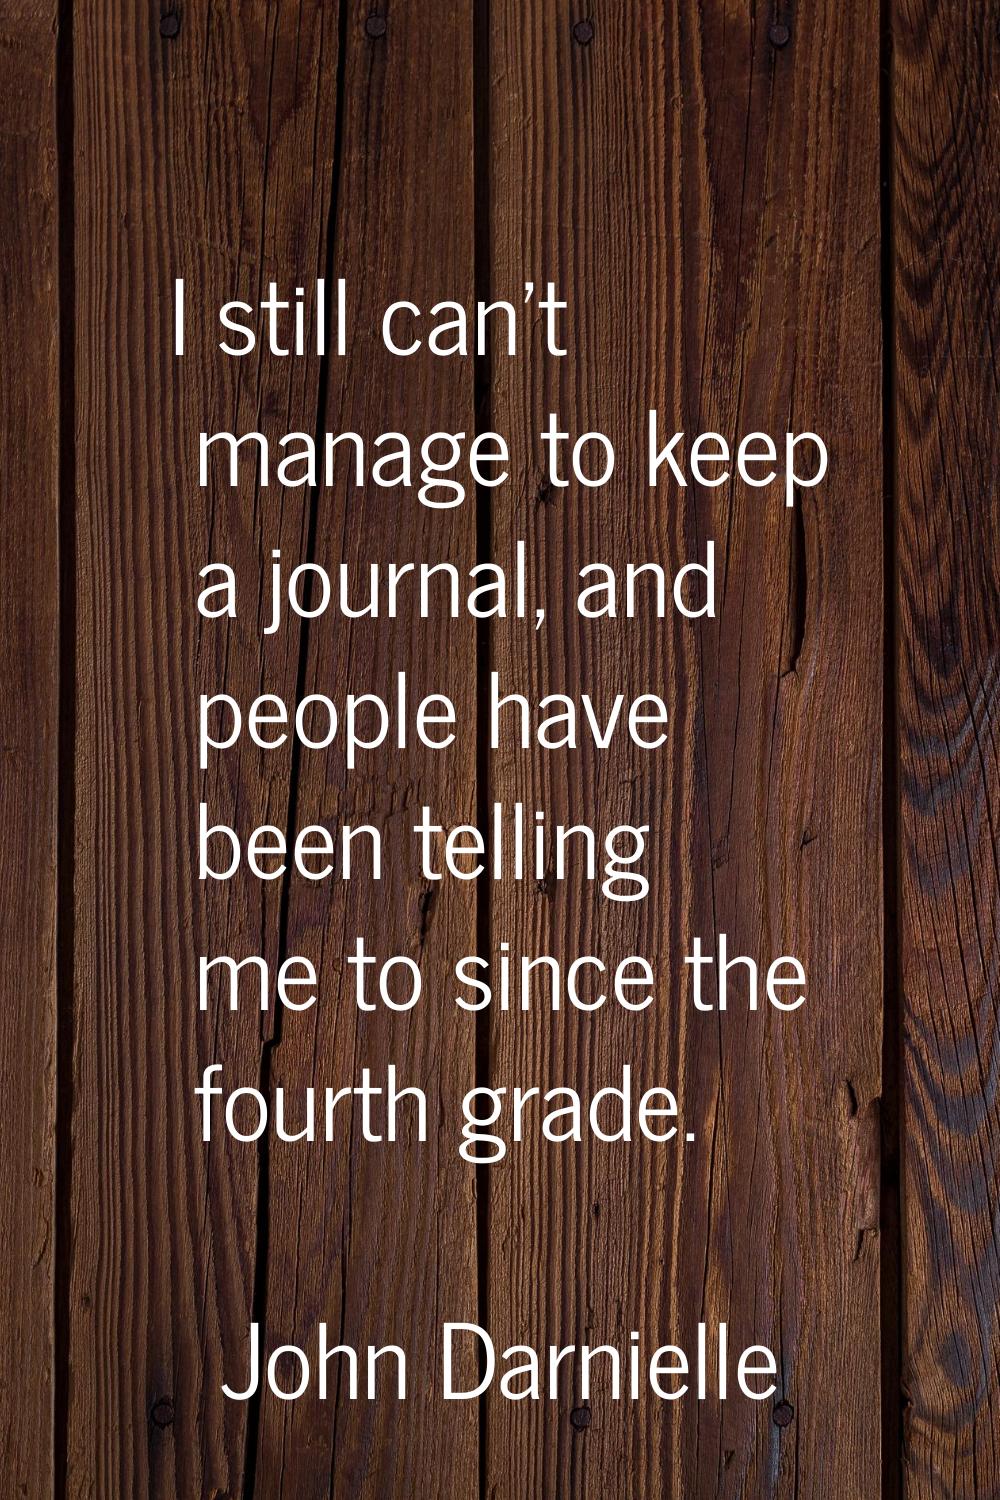 I still can't manage to keep a journal, and people have been telling me to since the fourth grade.